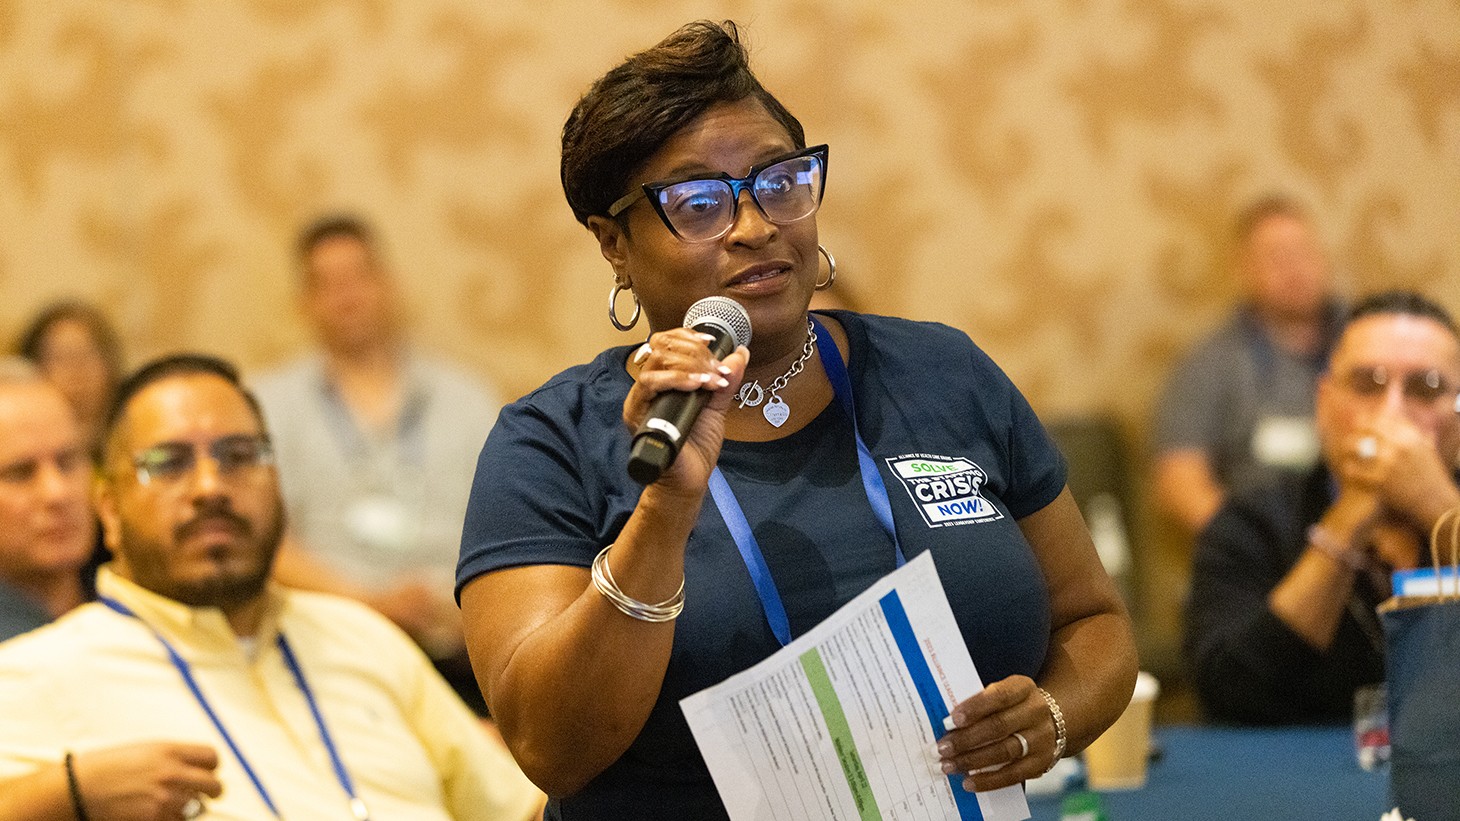 A Black woman, speaking into a handheld microphone at a conference